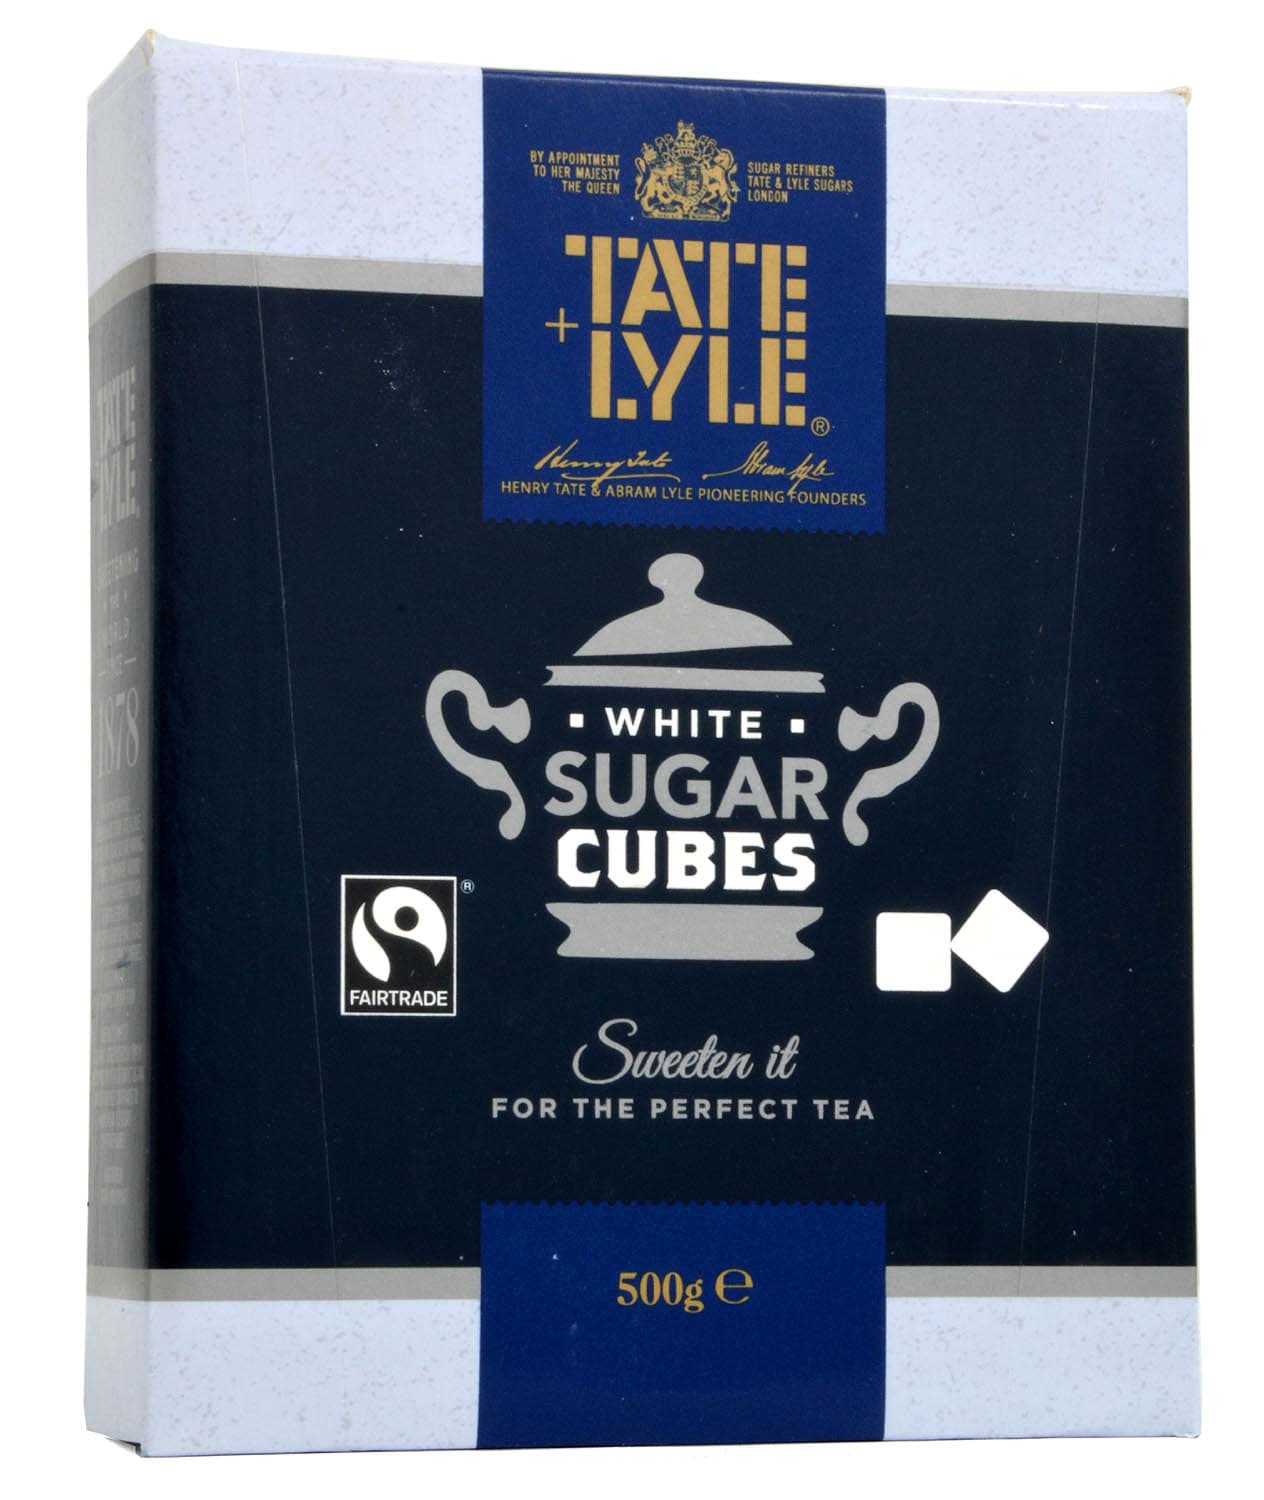 Picture of Tate+Lyle Fairtrade White Sugar Cubes for Tea